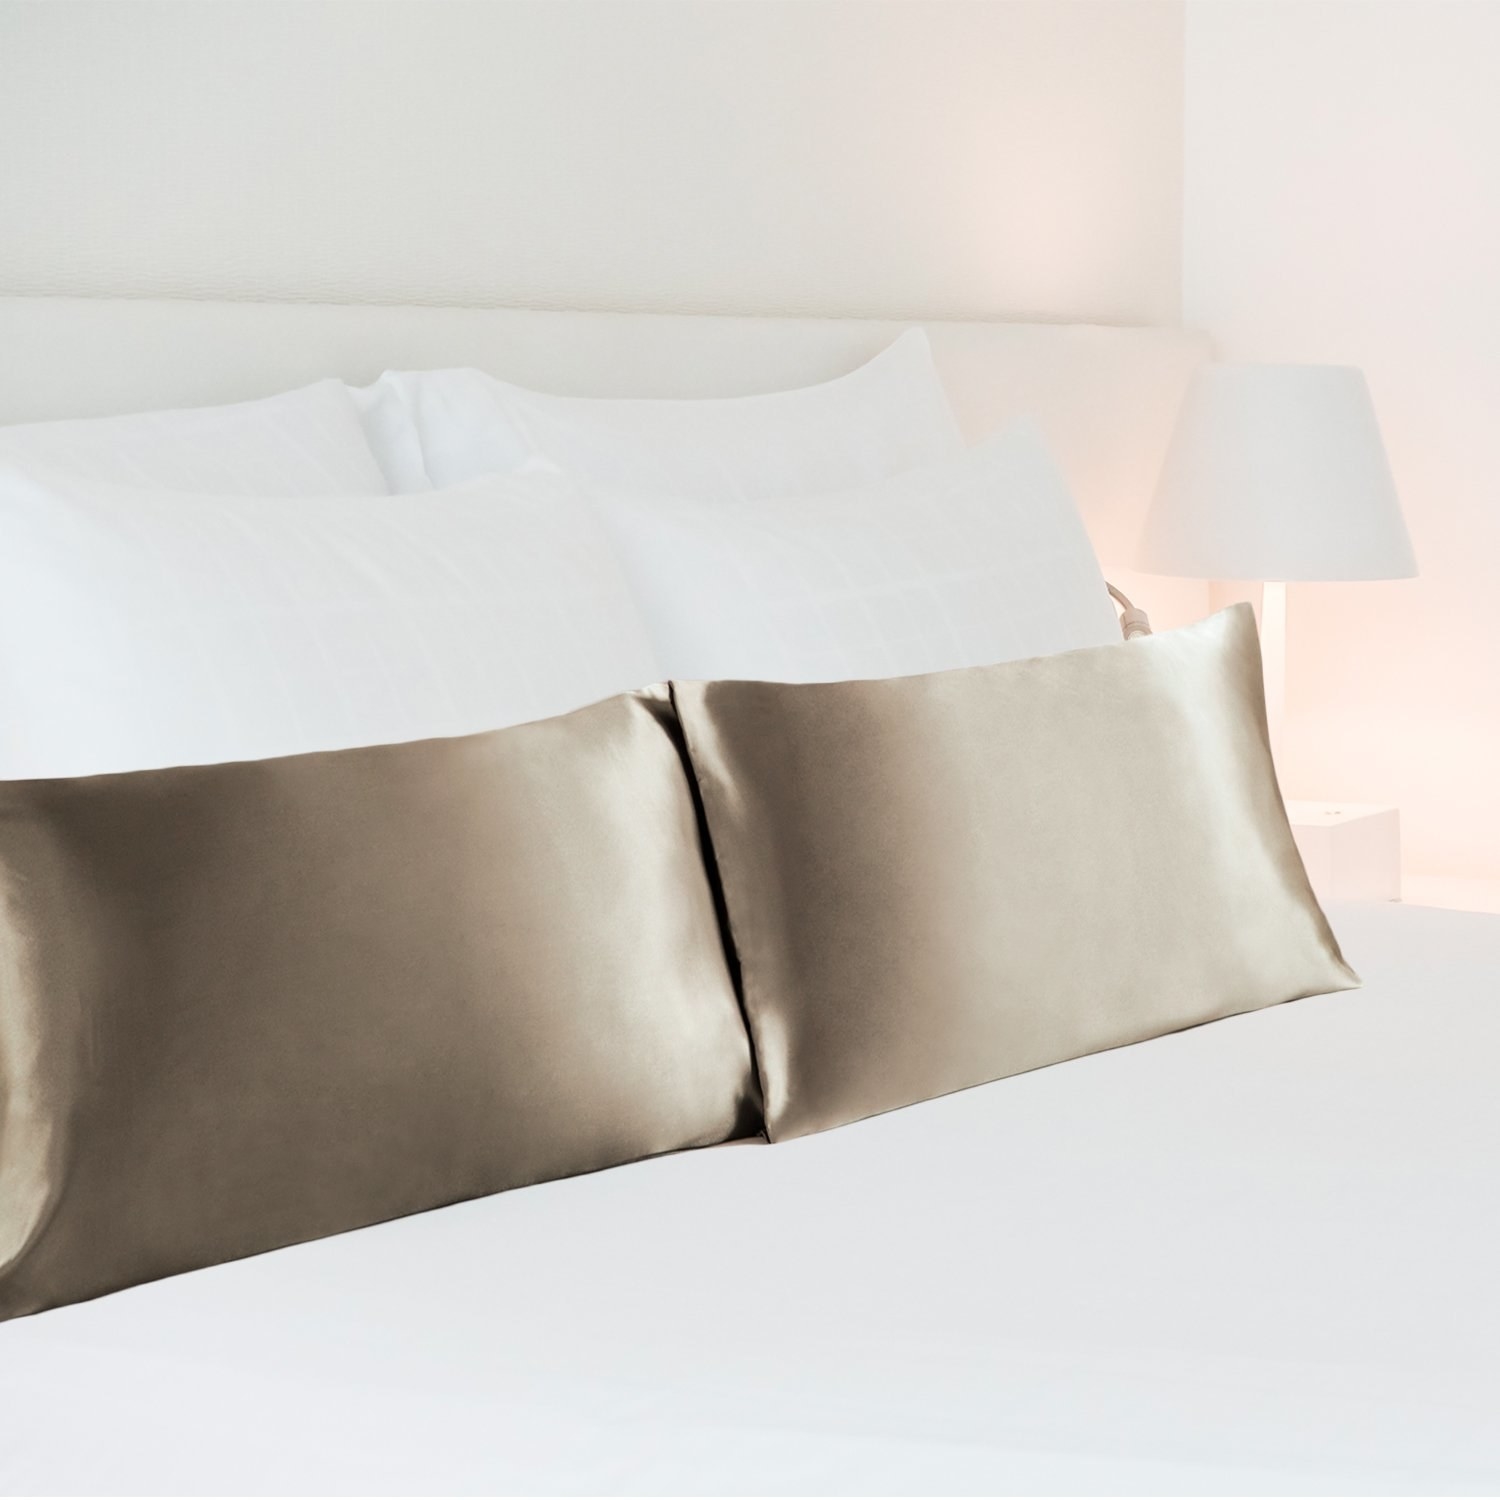 Two gold satin pillowcases on a bed